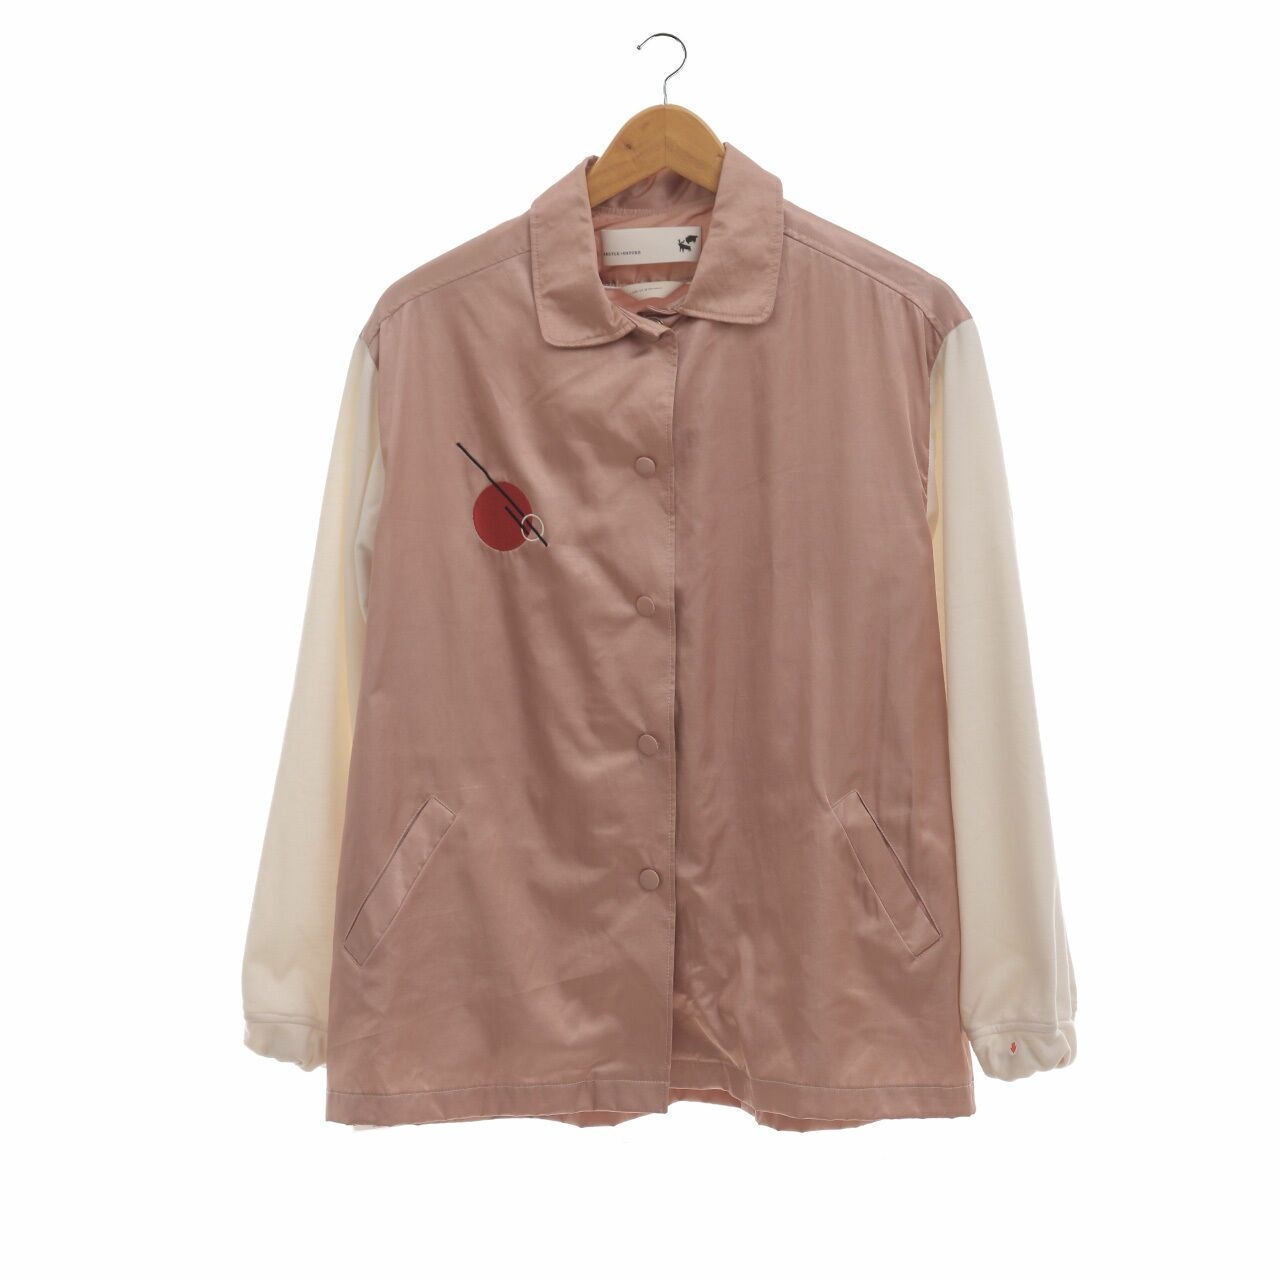 Argyle Oxford Dusty Pink Embroidery Shirt